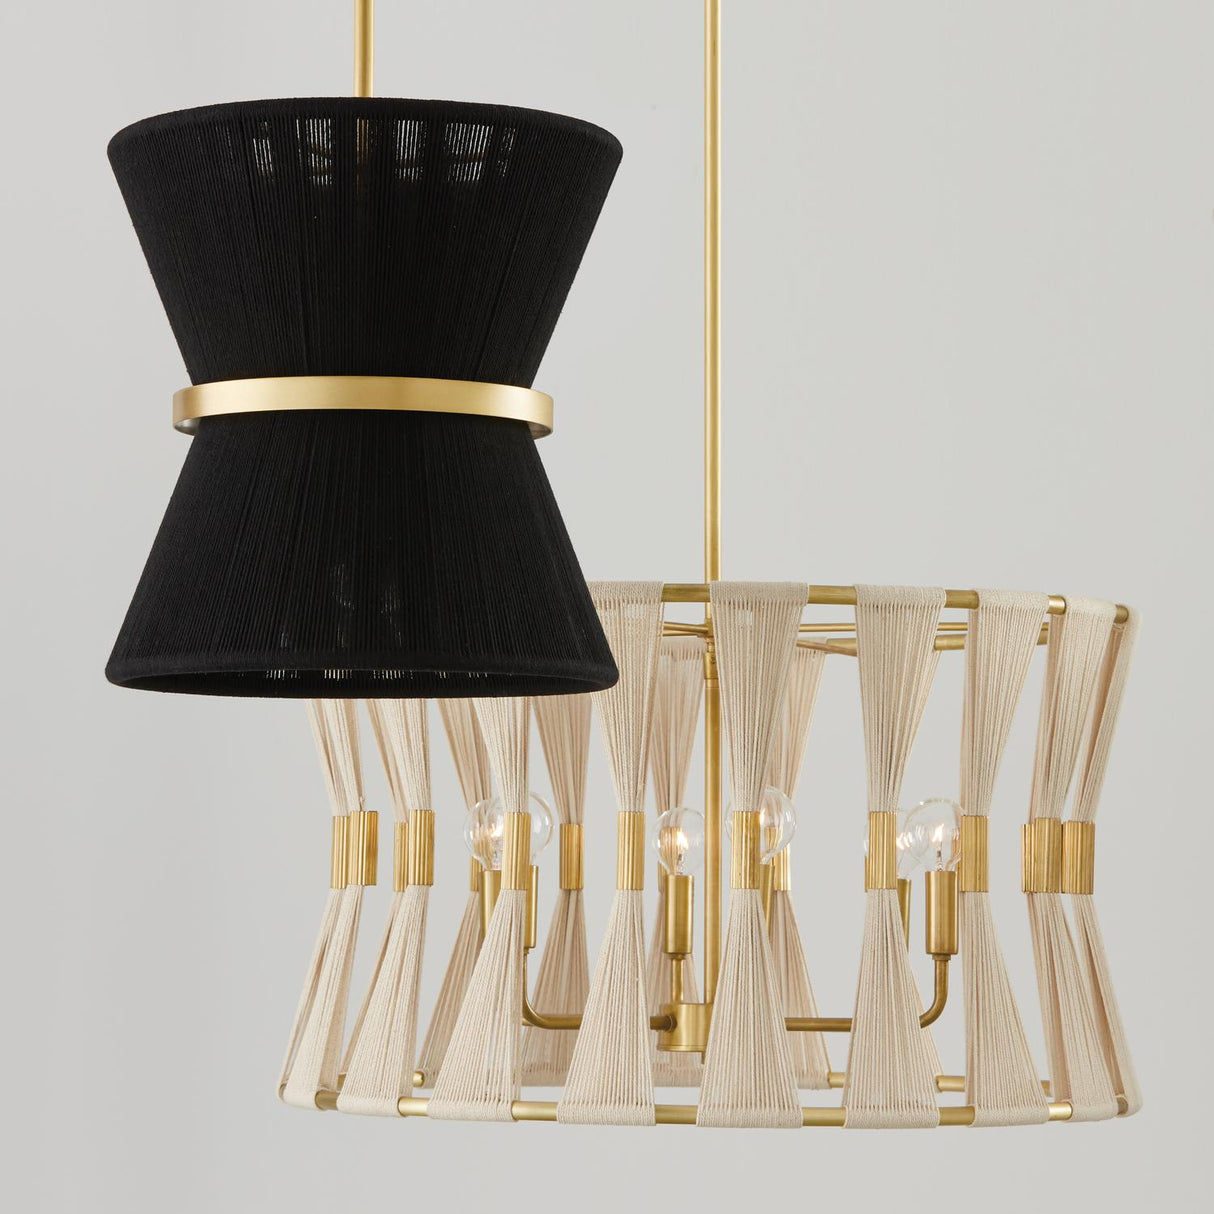 Capital Lighting 341161NP Bianca 6 Light Pendant Bleached Natural Rope and Patinaed Brass